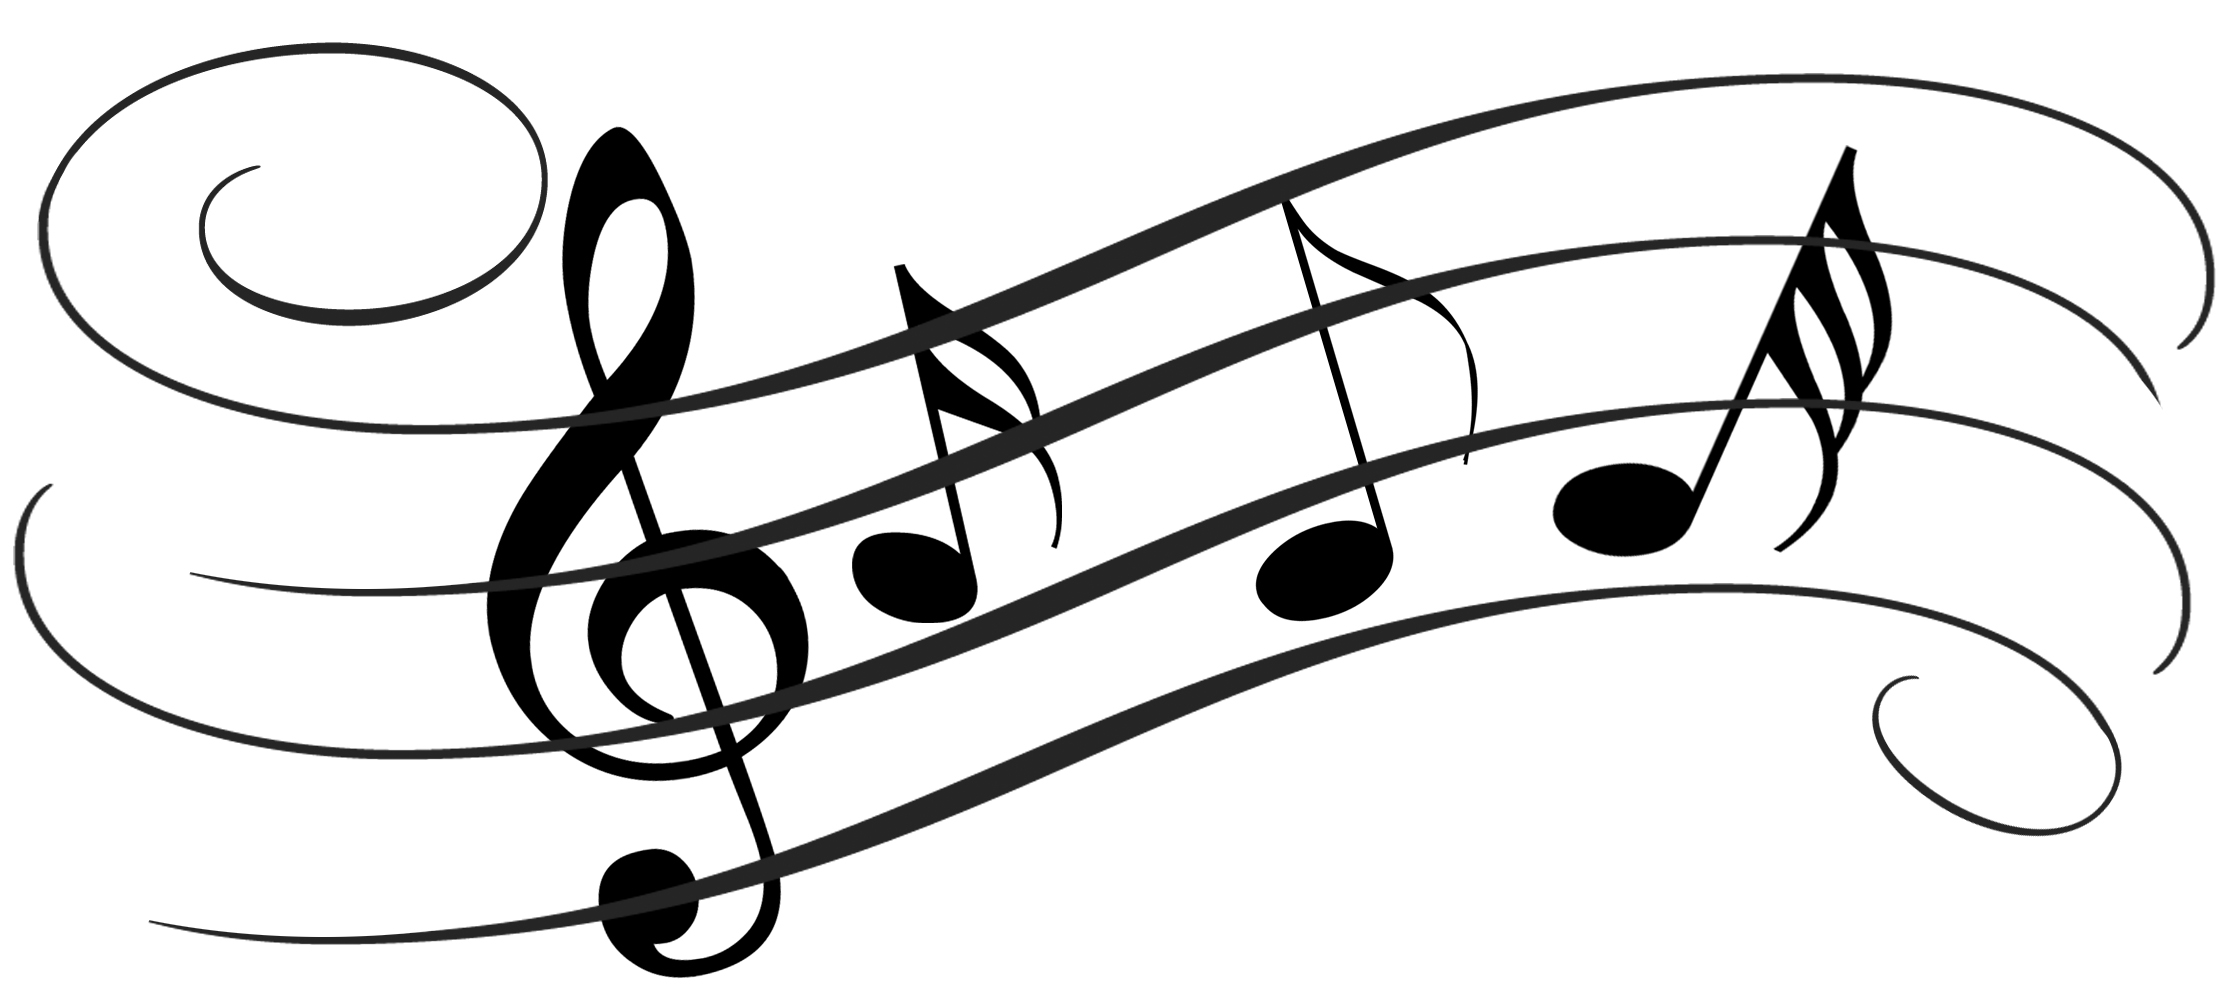 music clipart black and white - photo #12